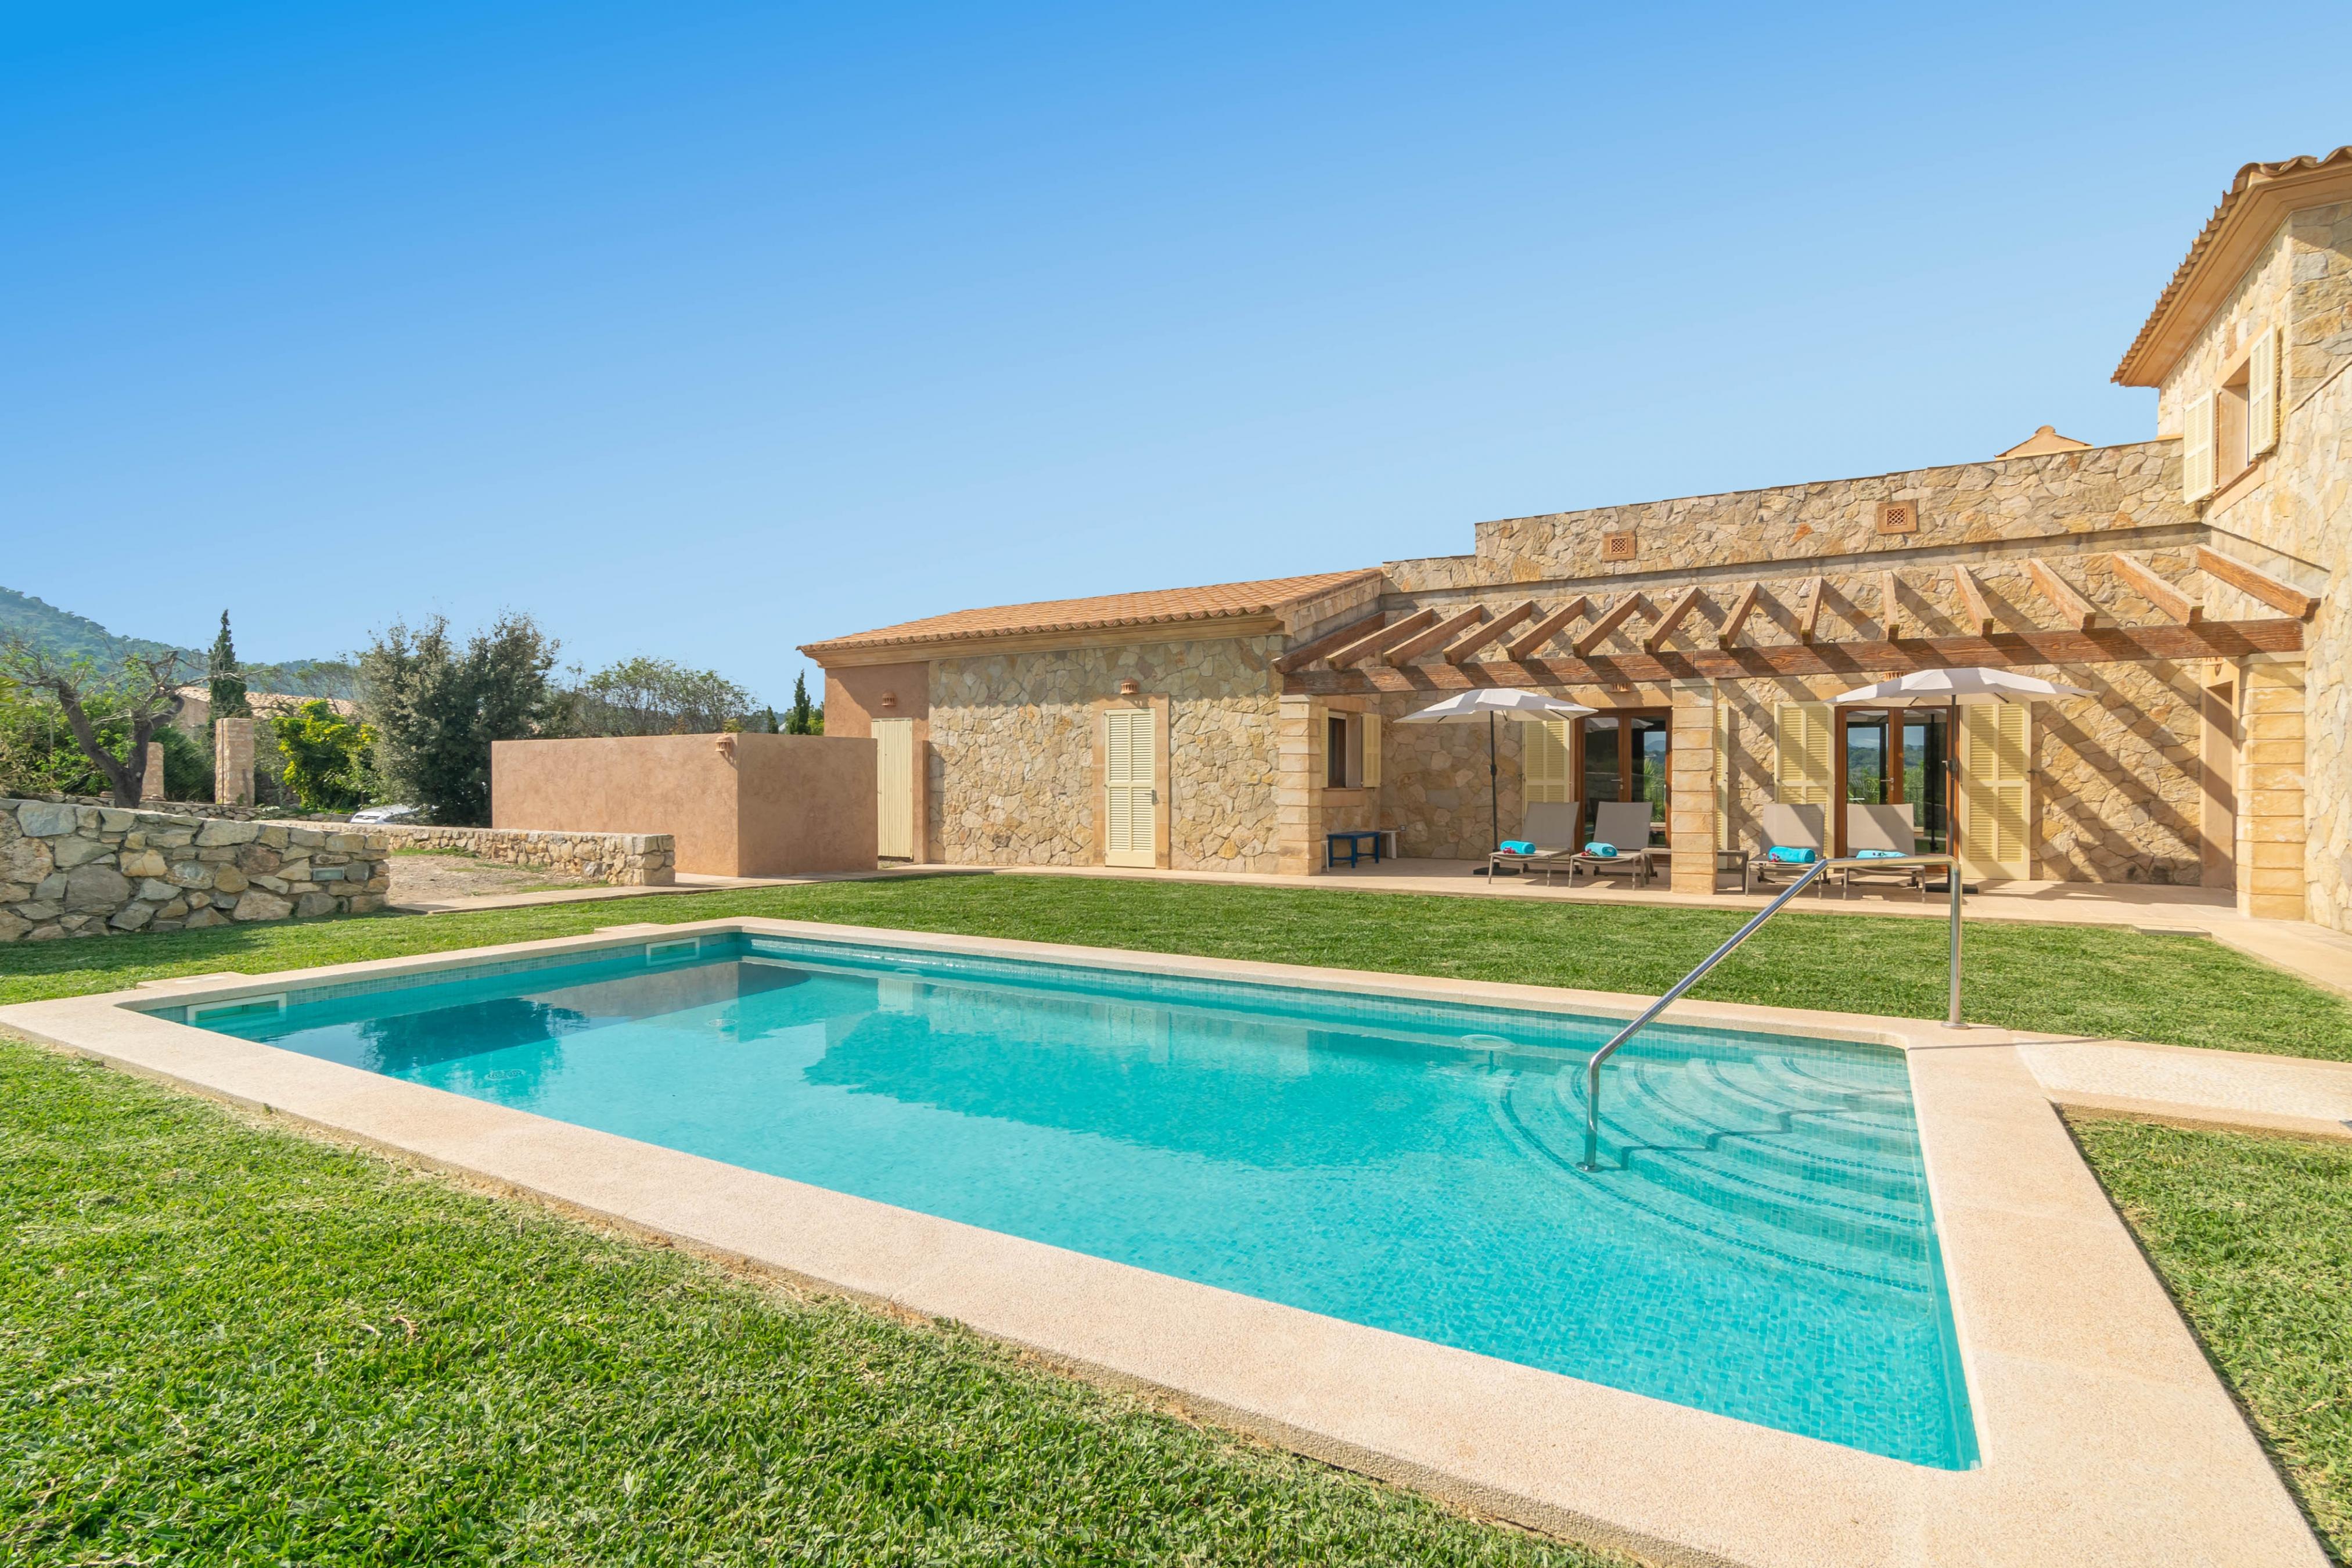 Property Image 2 - FETGET-CAN BOSCO - Nice country house with private pool close to the beach. Free WiFi